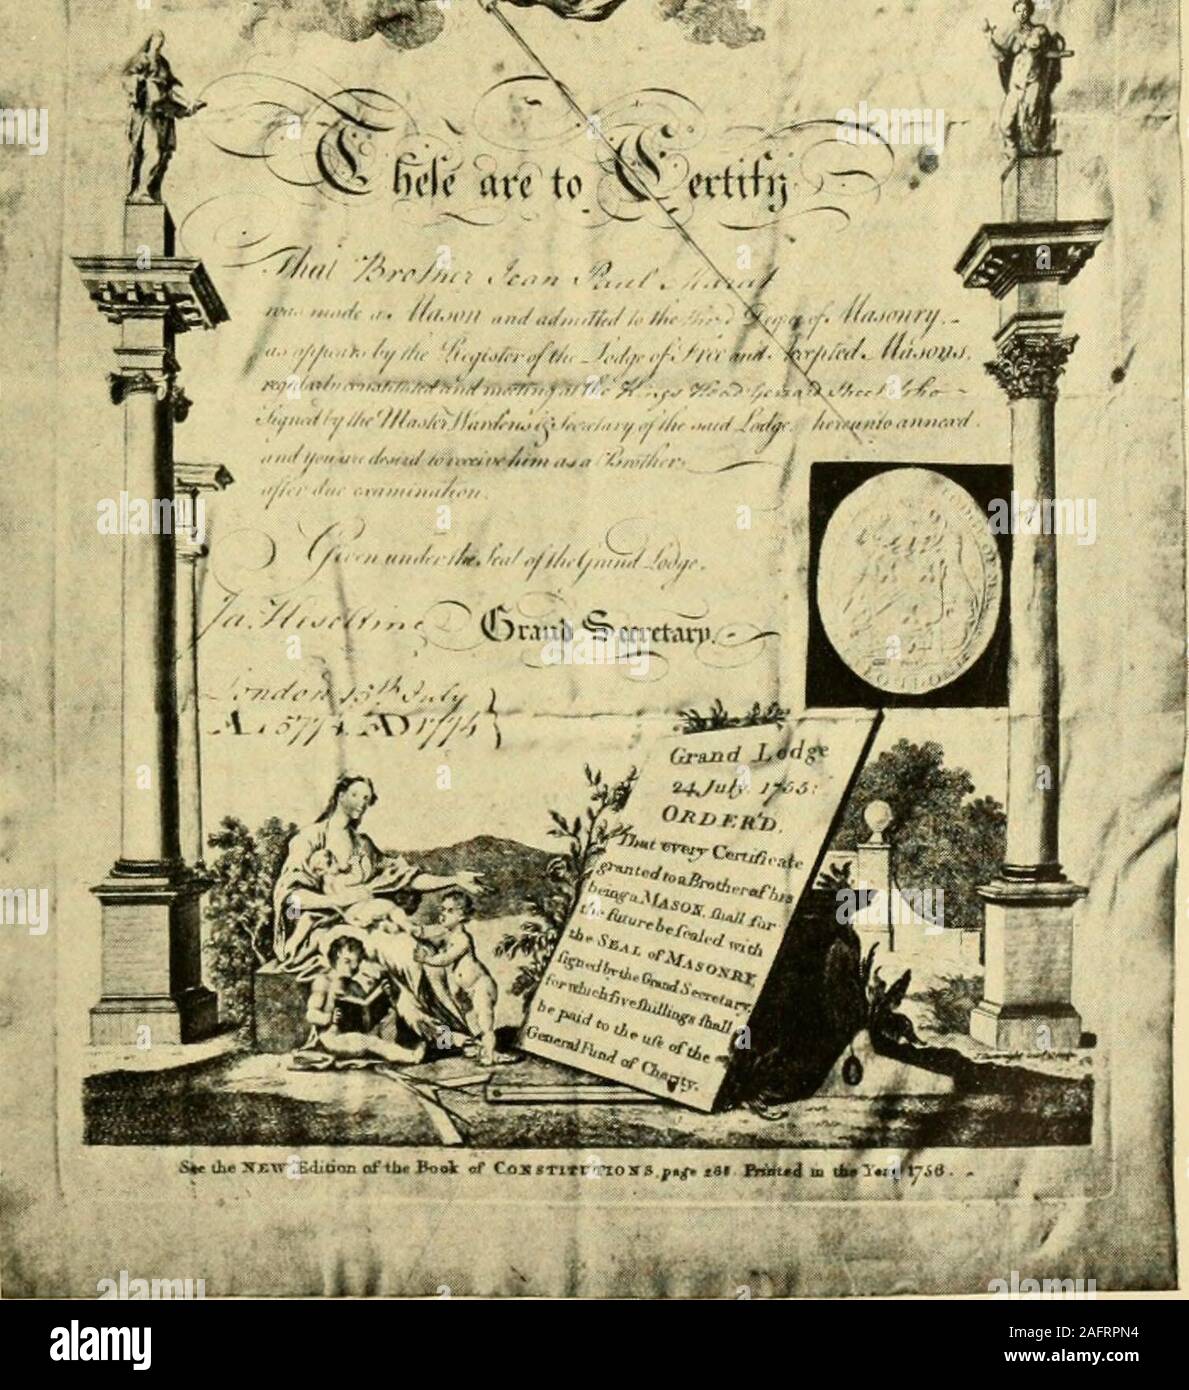 Robespierre and the French revolution. :m. CEKTIFU ATK OF MEMBEKSHIF IN AN  ENGLISH LUDL.E OF MASONS OF JEAN PAUL MARAT From an engraving in the  collection of illiam T. Latta, Ksq.